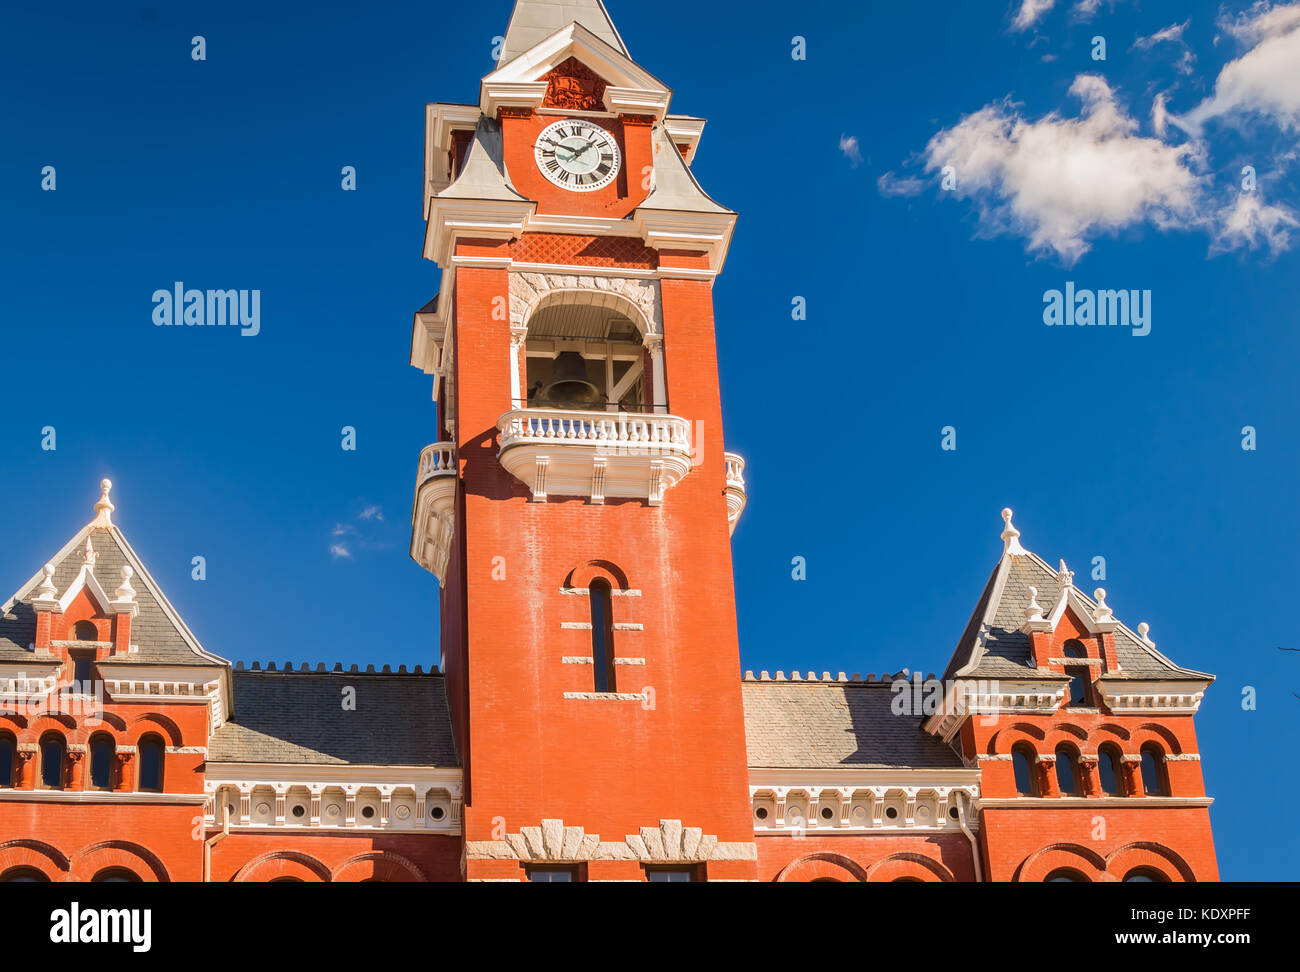 Front facing view of New Hanover Courthouse clock tower in Wilmington NC Stock Photo